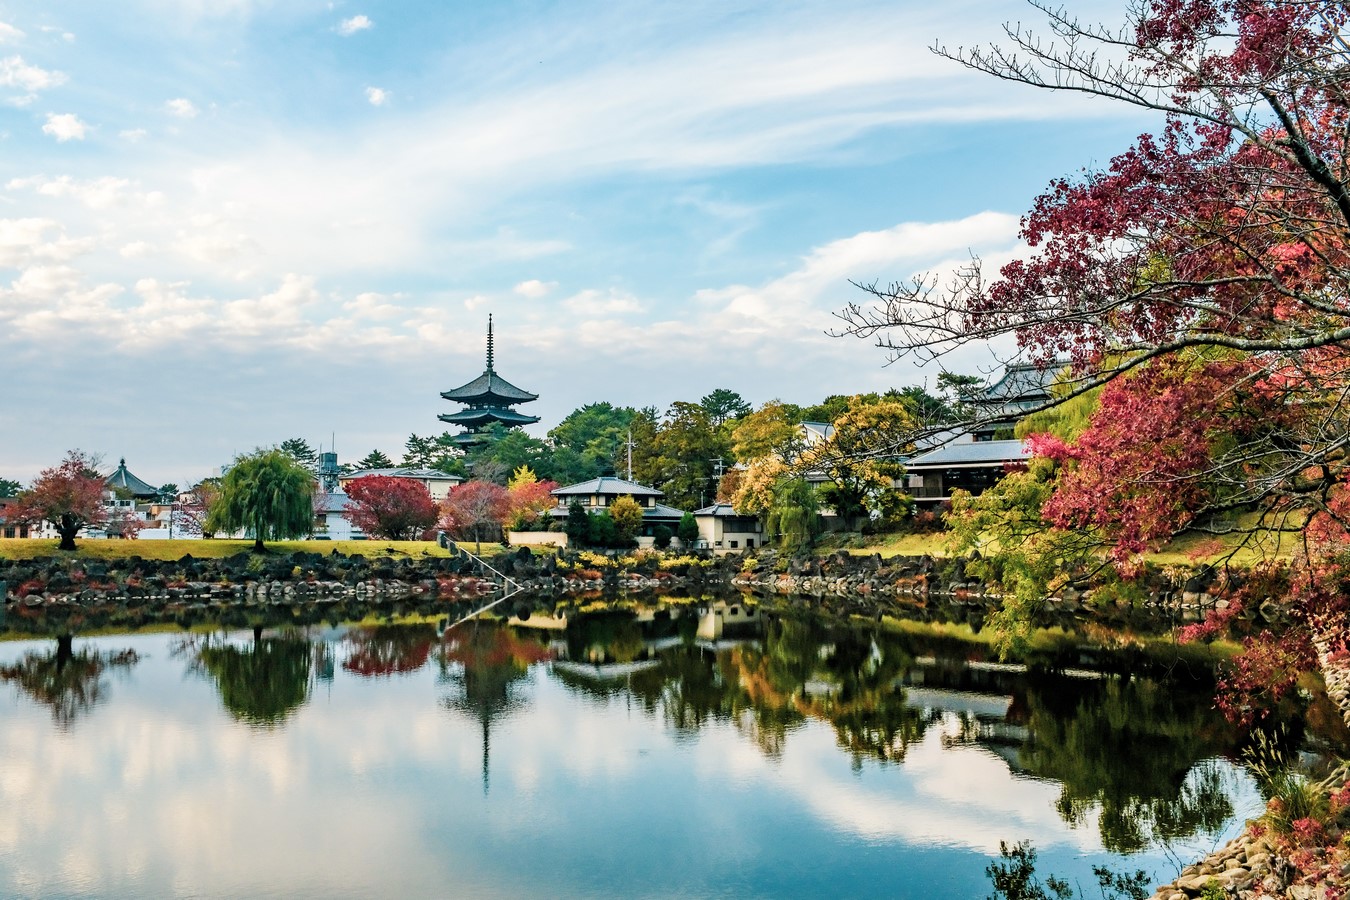 Architecture of Cities: Nara- The Historic City of Japan - Sheet5